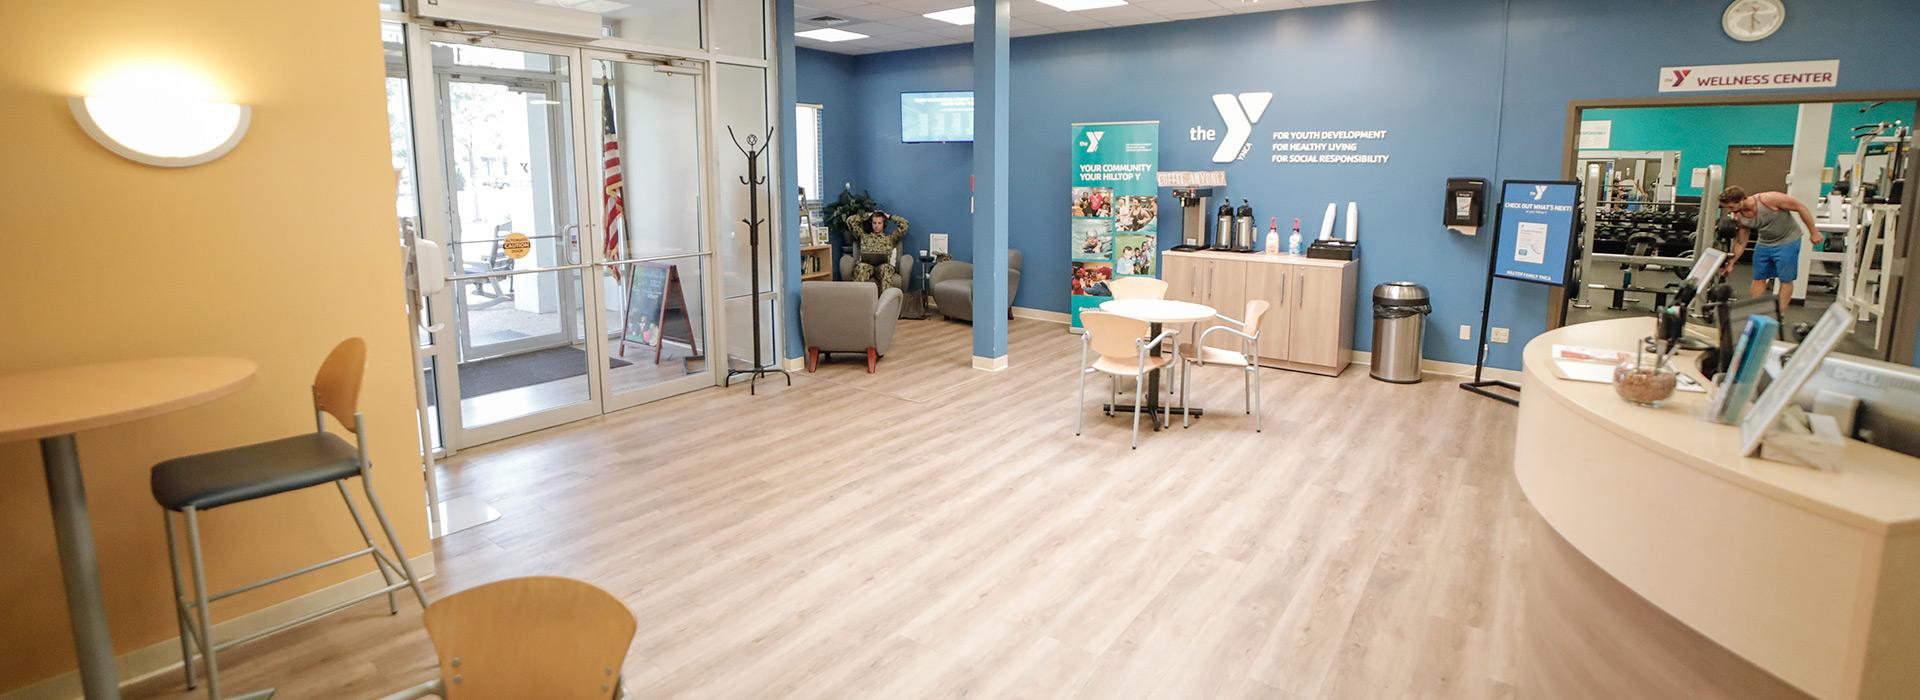 Newly renovated lobby and member connection space at the Hilltop Family YMCA